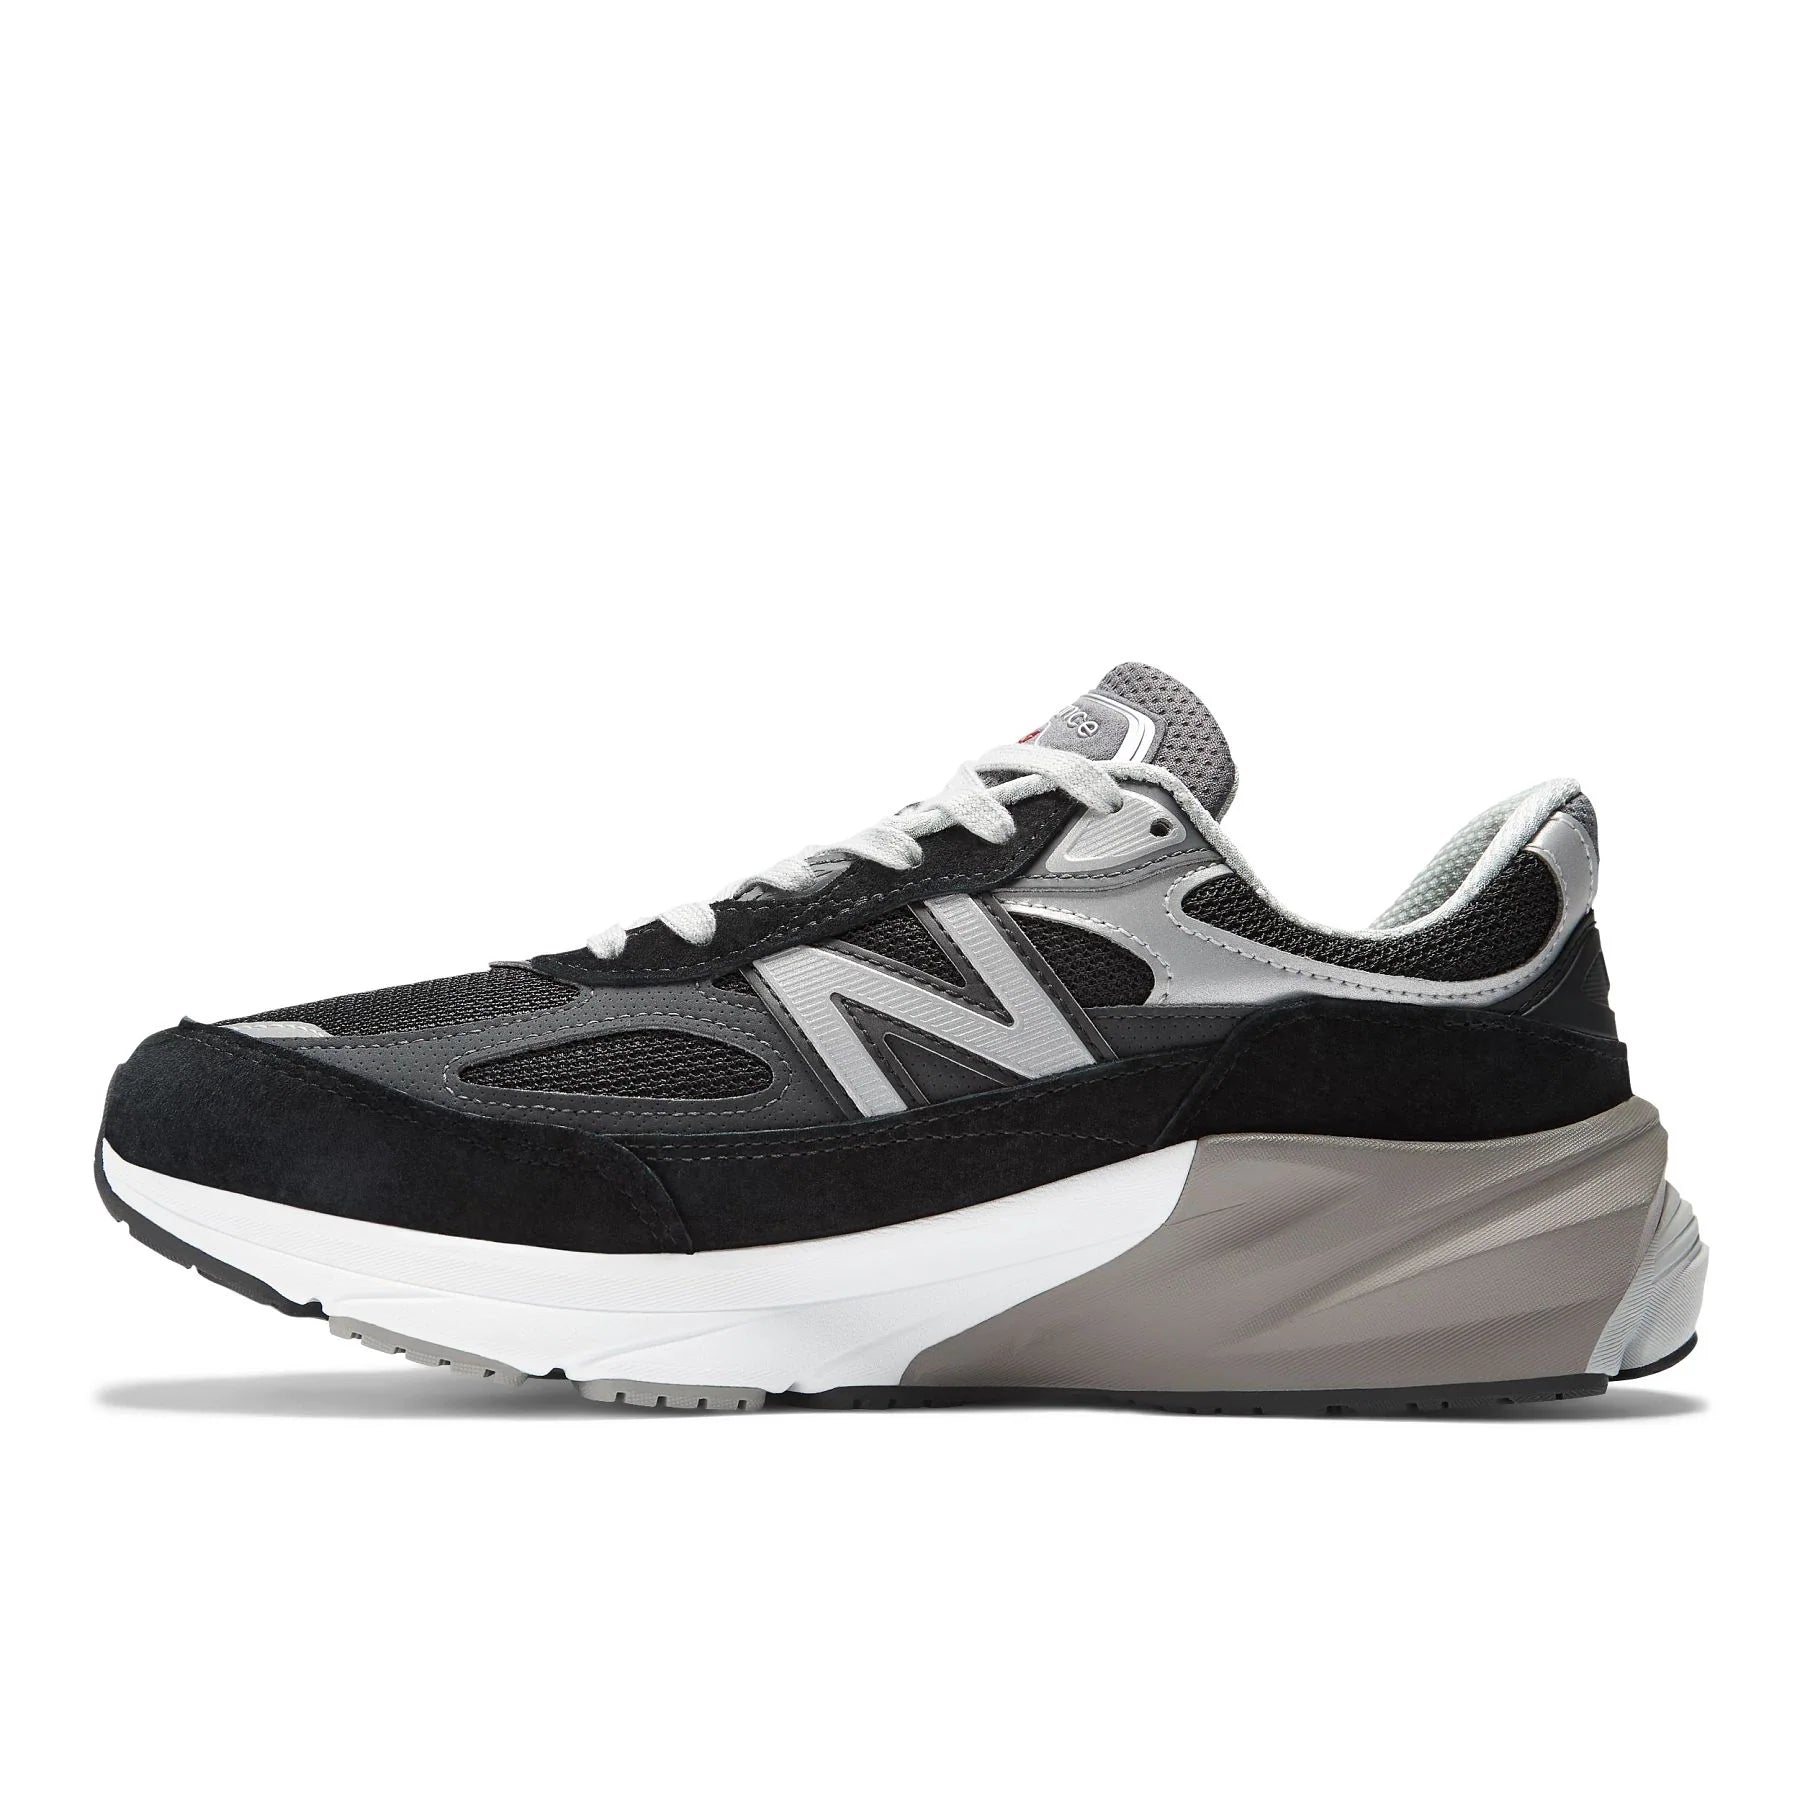 Medial view of the Men's New Balance 990 V6 lifestyle shoe in the color Black/White